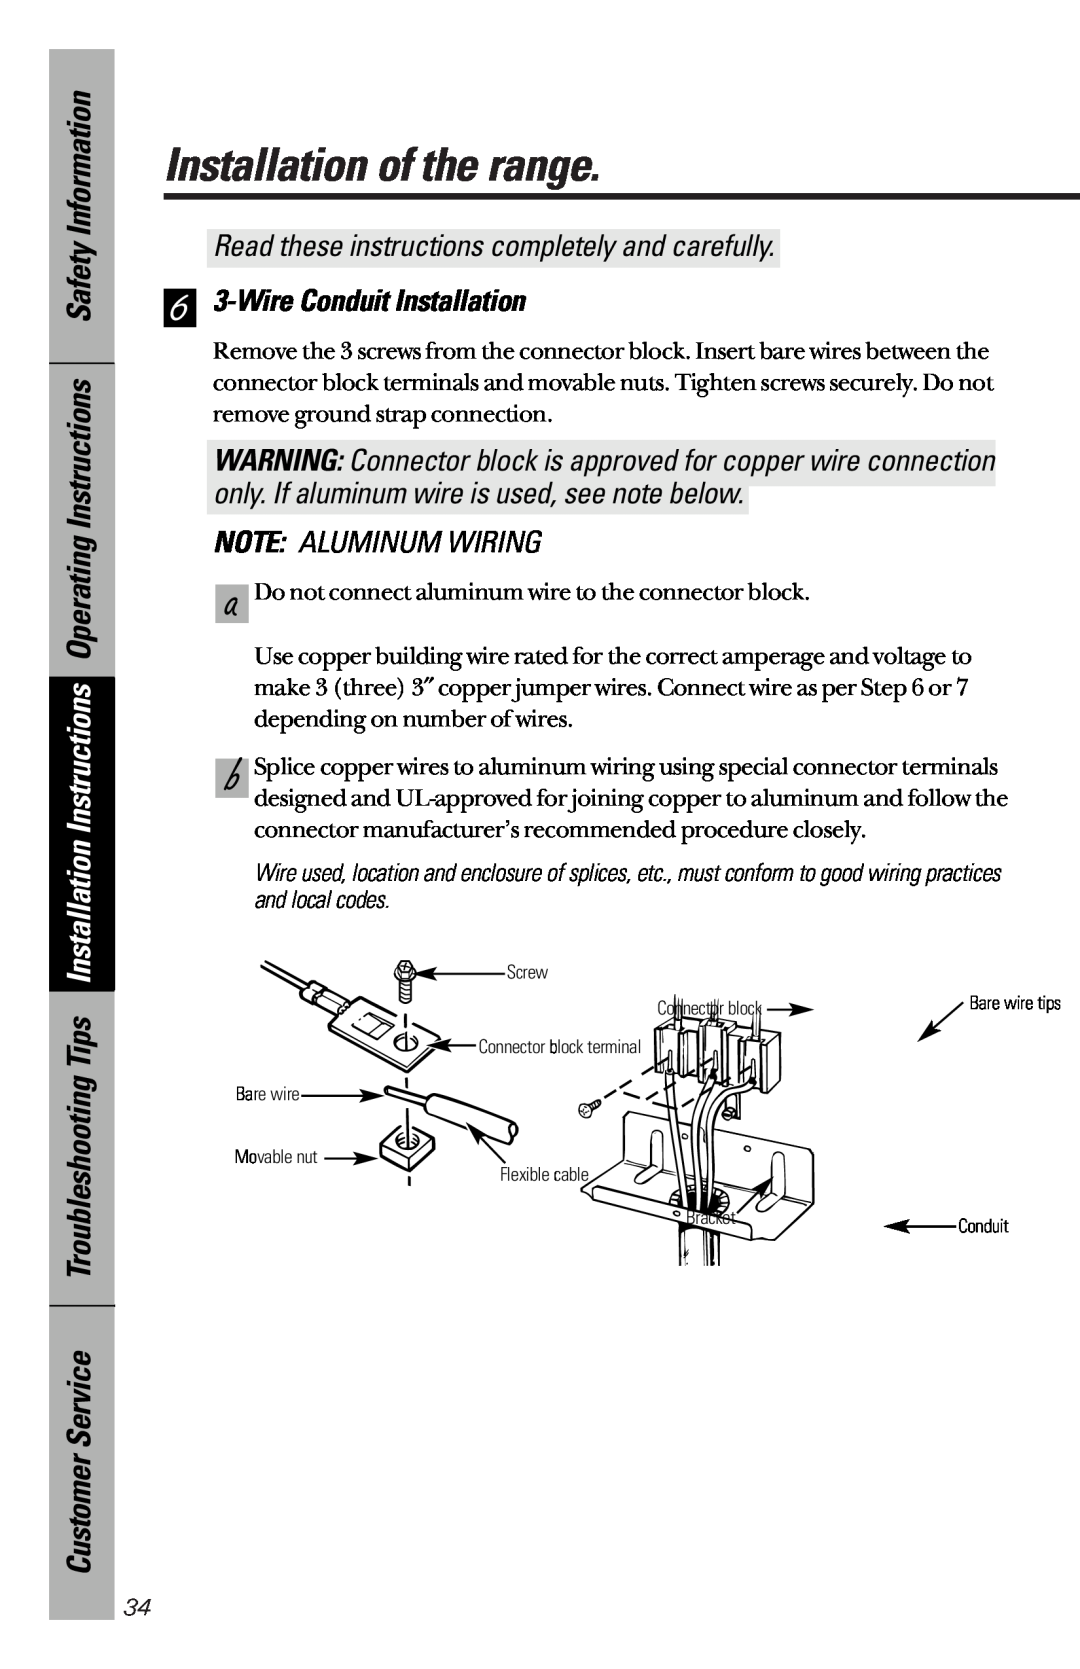 GE 164D3333P172 owner manual 6 3-WireConduit Installation, Note Aluminum Wiring, Installation of the range, and local codes 